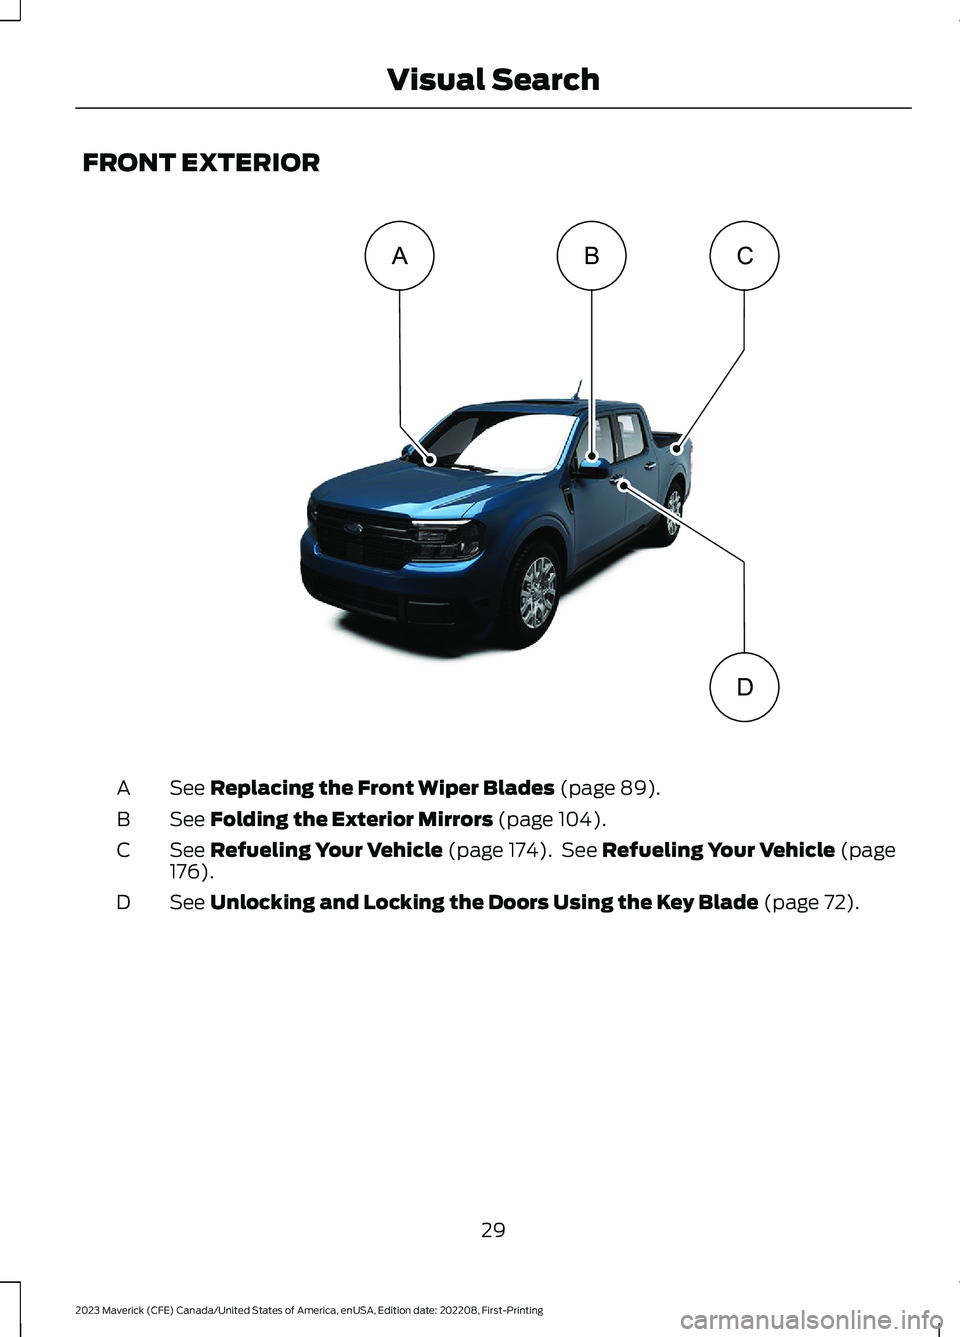 FORD MAVERICK 2023  Owners Manual FRONT EXTERIOR
See Replacing the Front Wiper Blades (page 89).A
See Folding the Exterior Mirrors (page 104).B
See Refueling Your Vehicle (page 174). See Refueling Your Vehicle (page176).C
See Unlockin